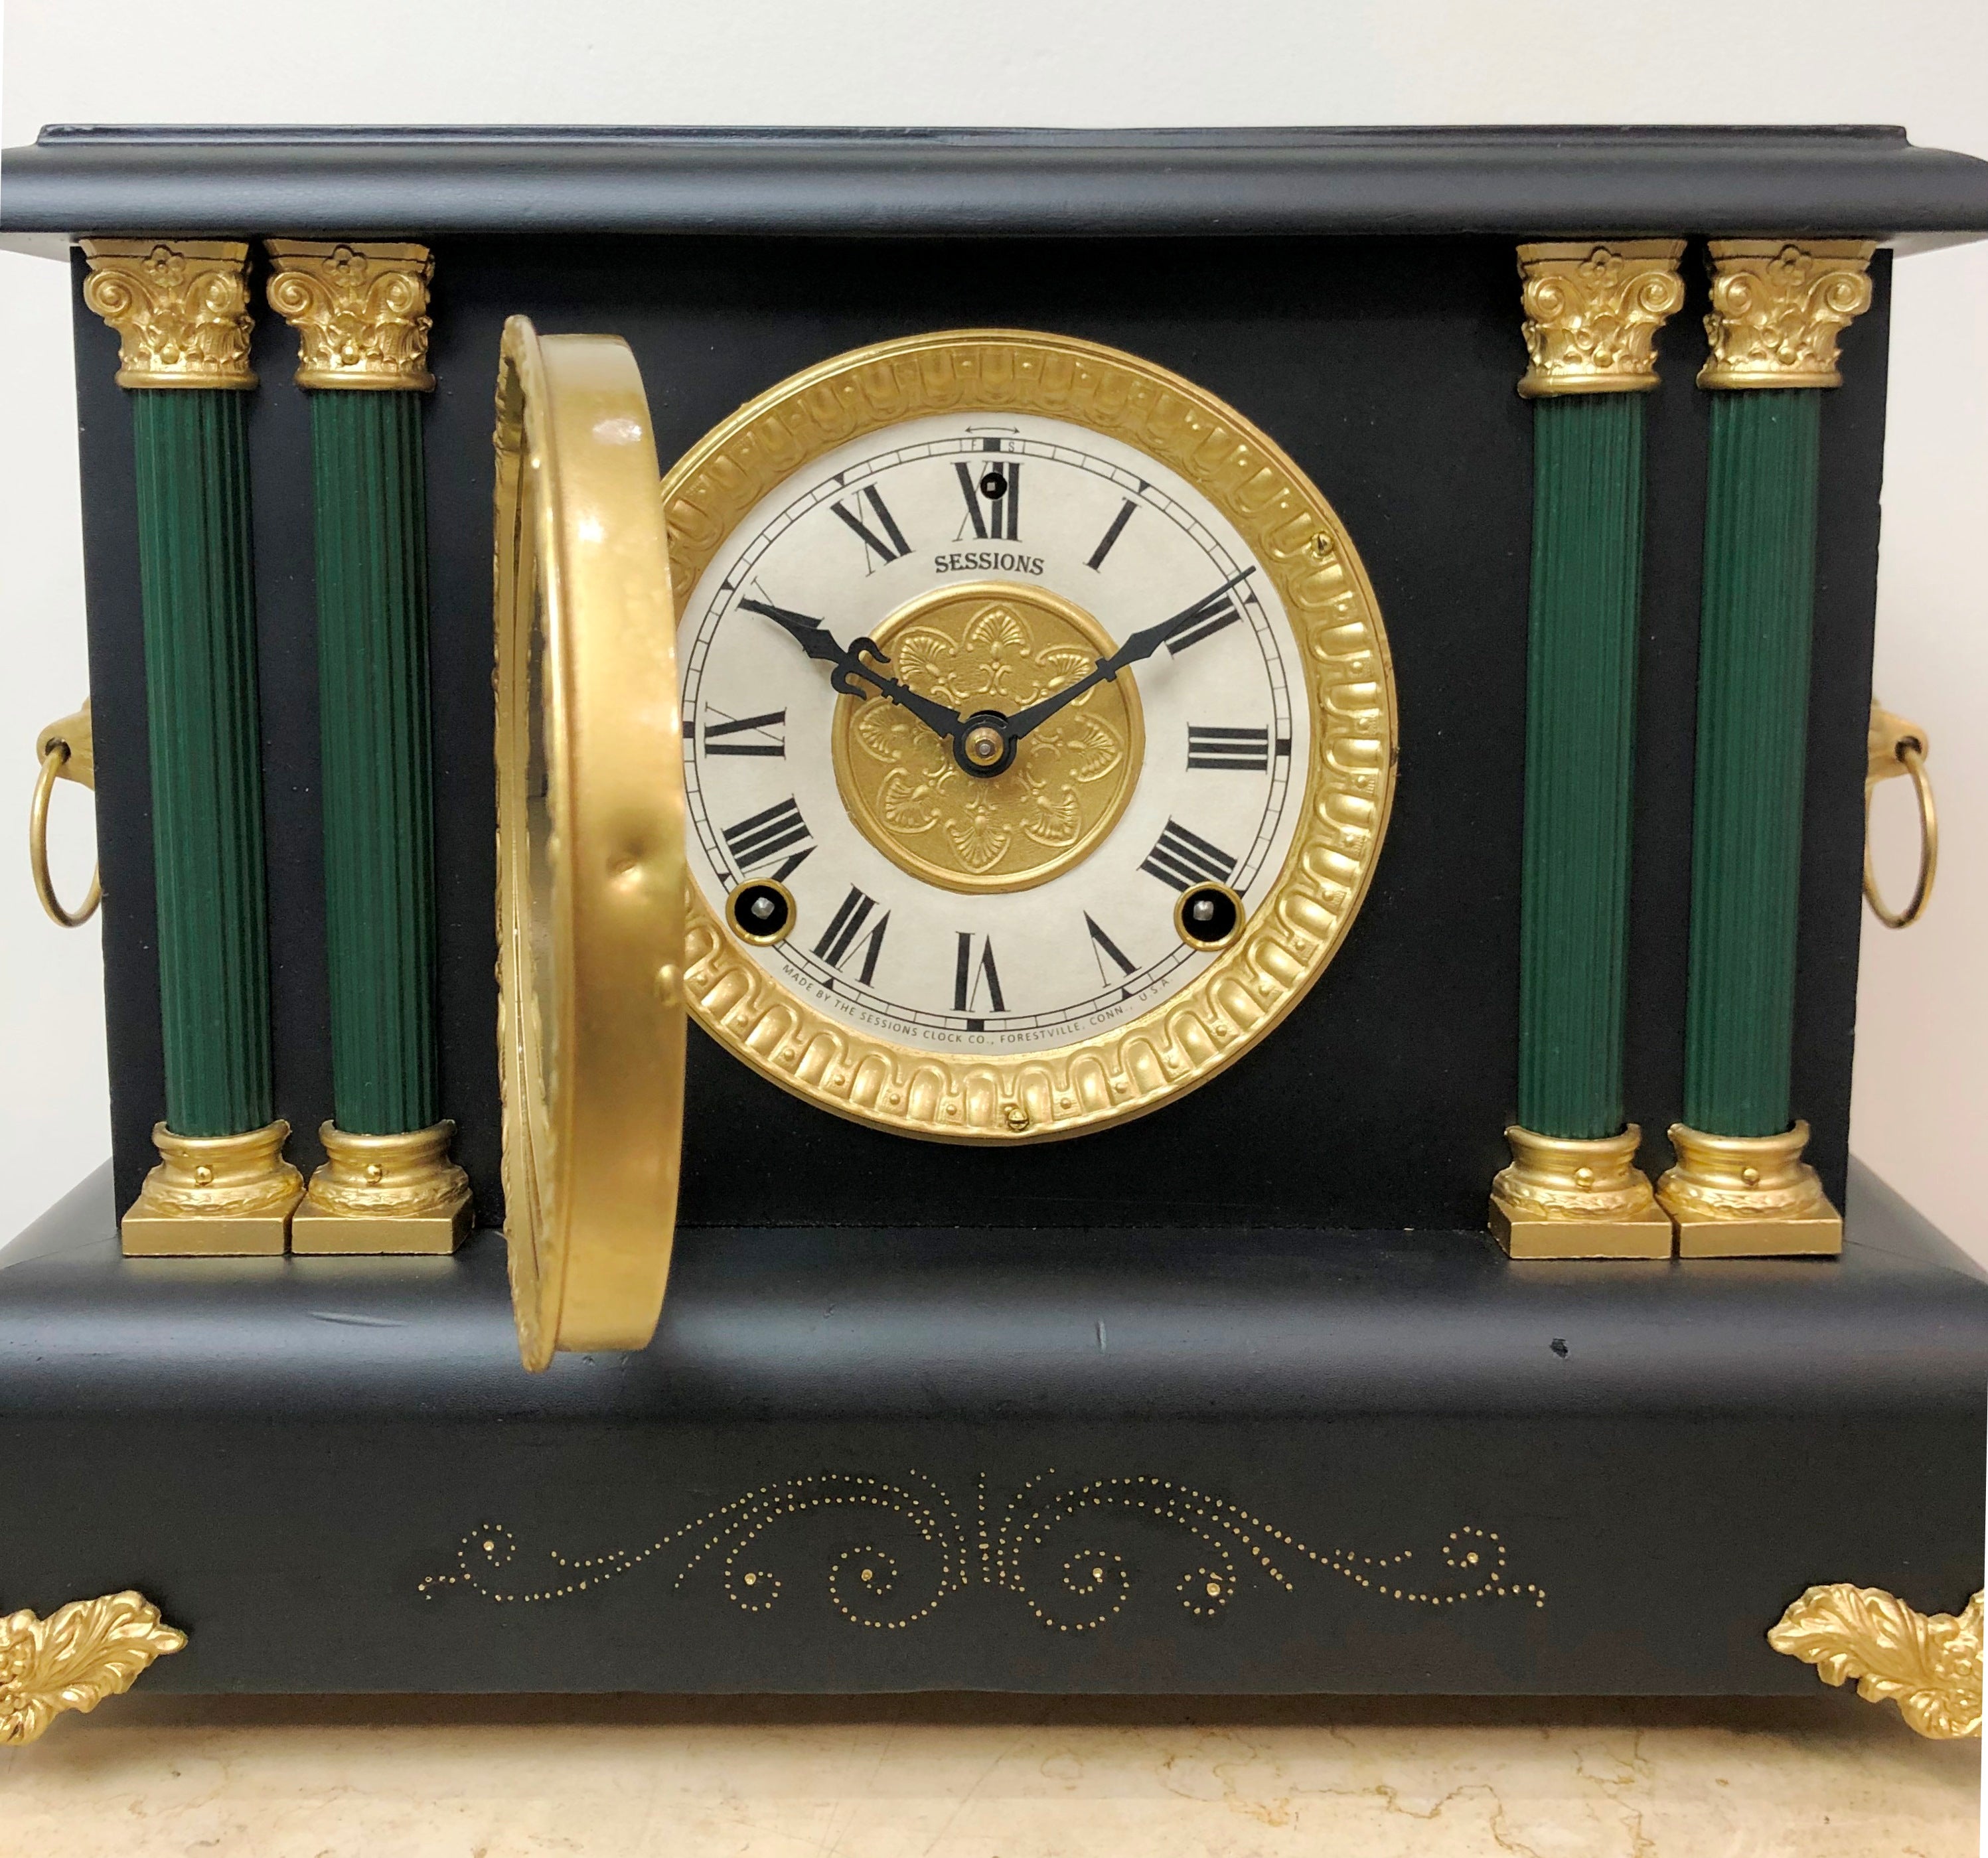 Antique Sessions Bell & Hammer Chime Mantel Clock | eXibit collection